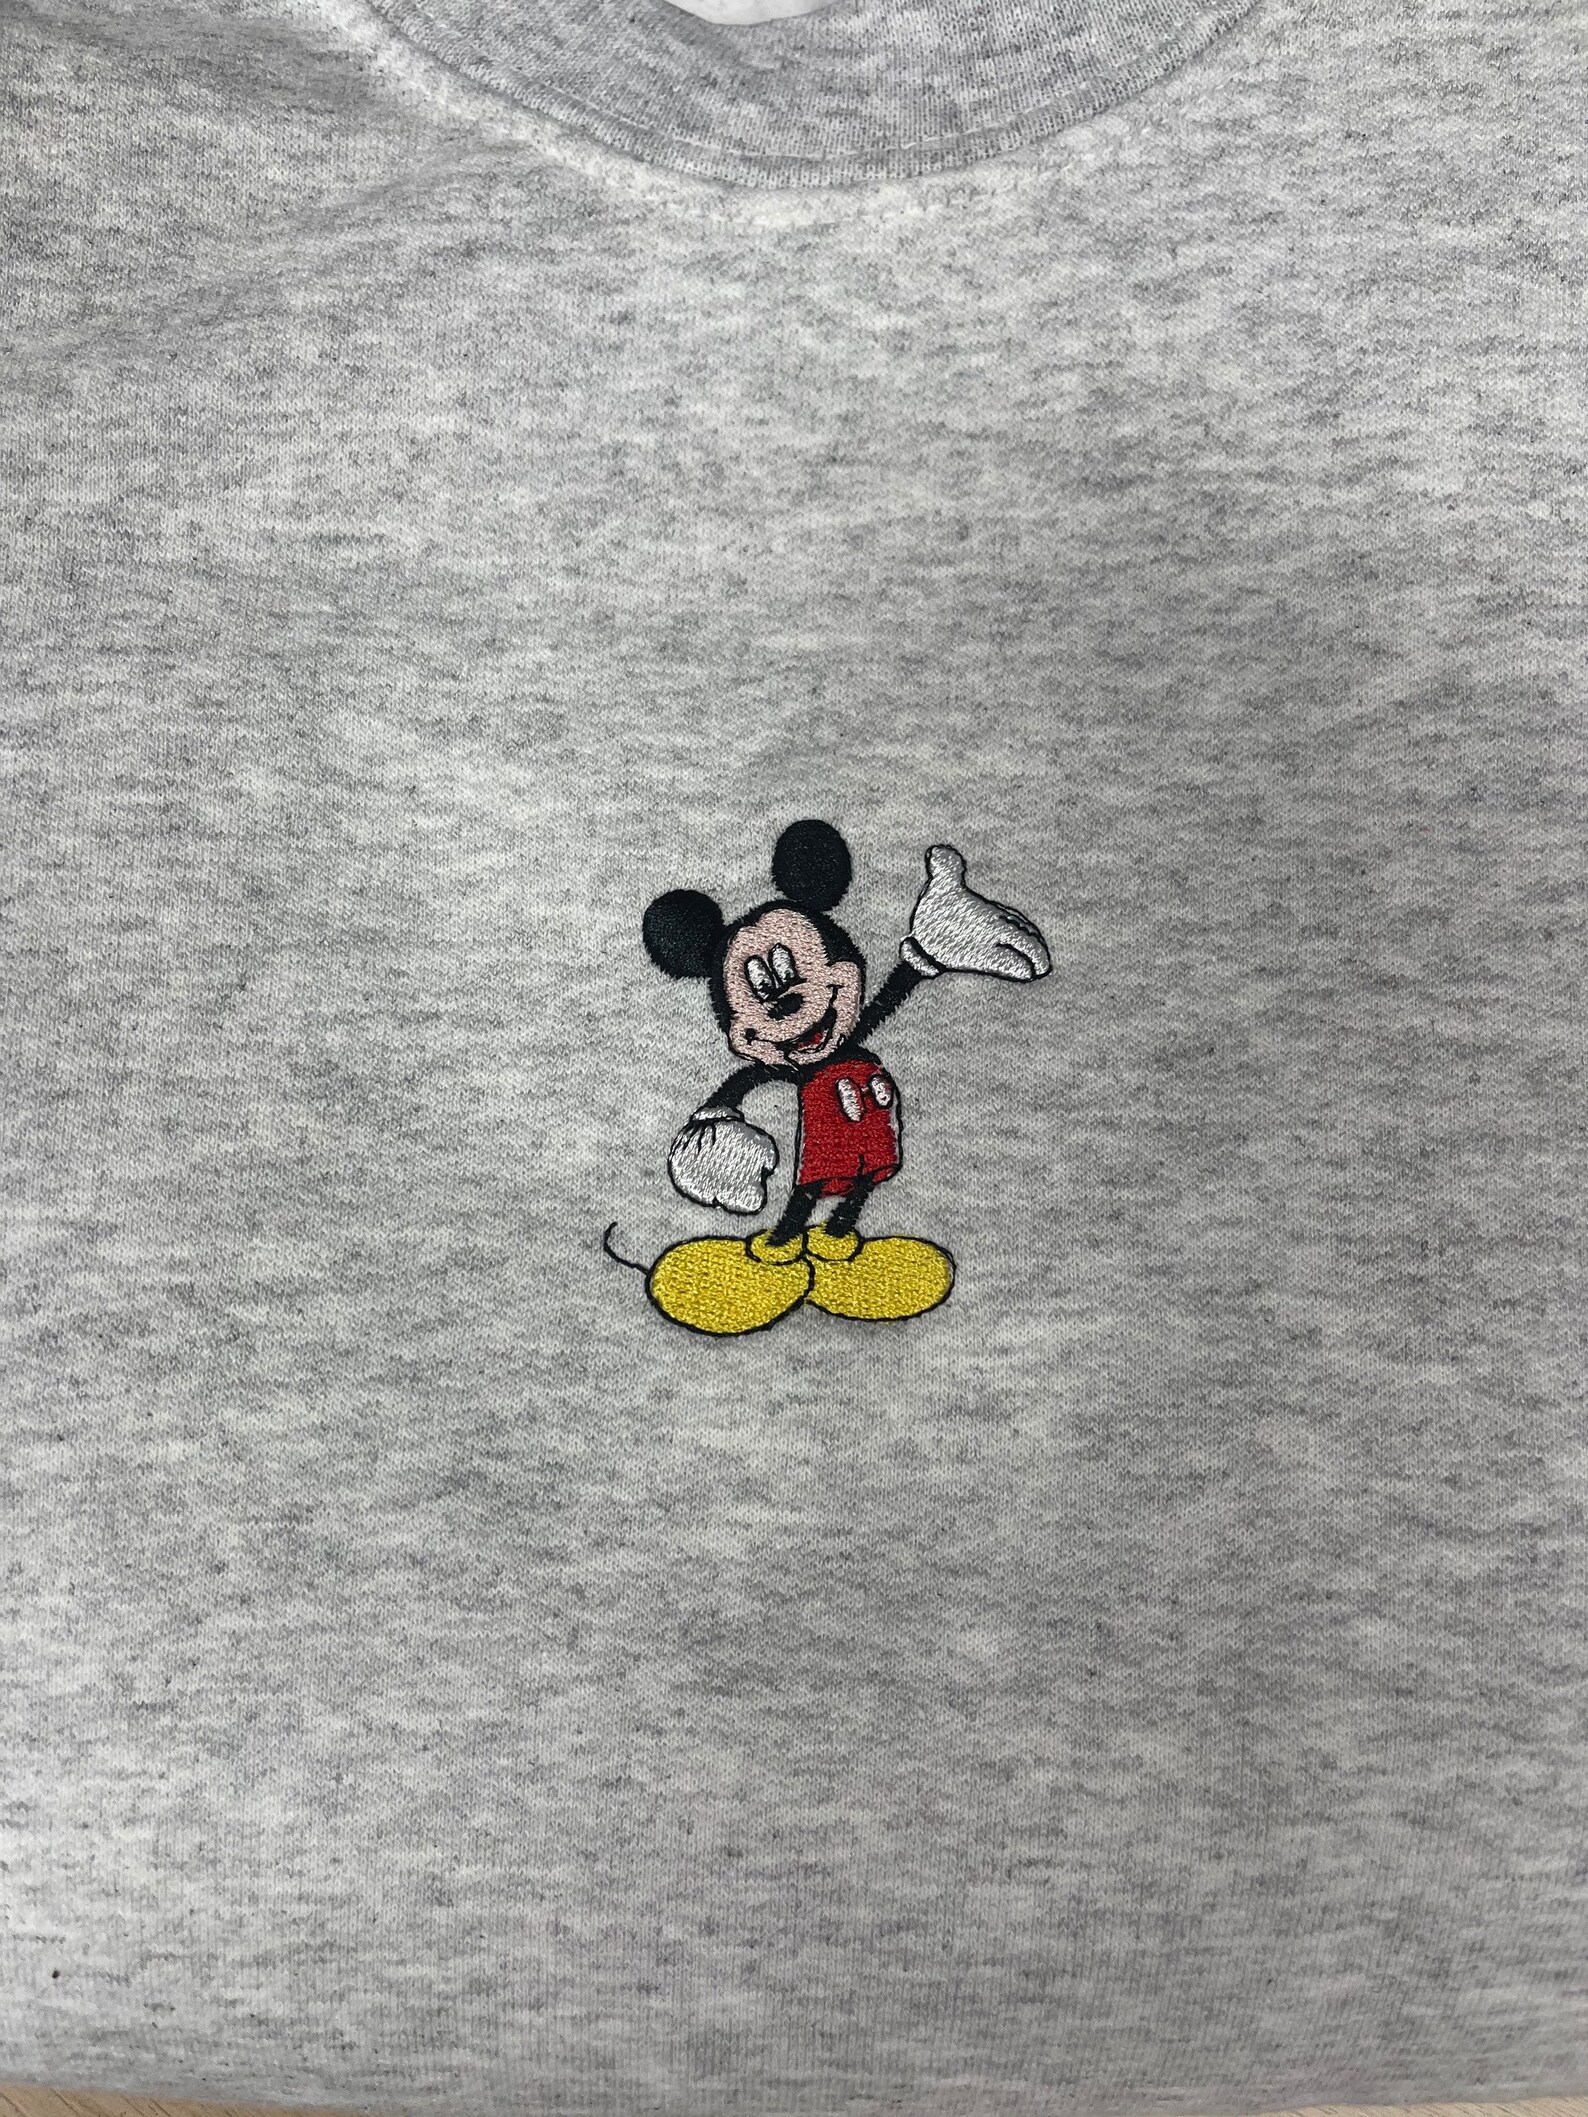 Classic Disney Mickey Mouse or Minnie Mouse Embroidered - Etsy